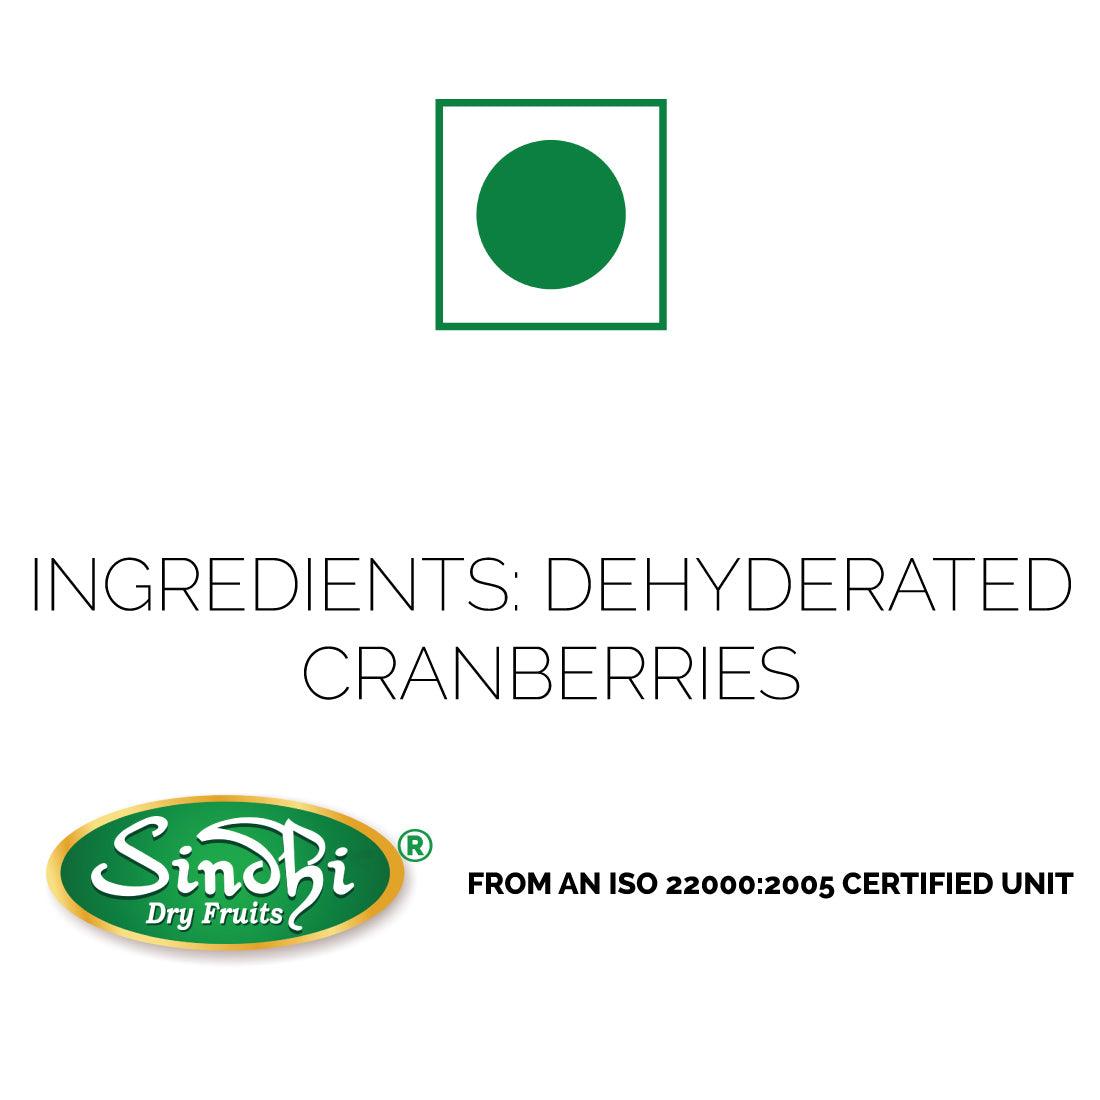 Shop for dehydrated cranberries online - premium quality